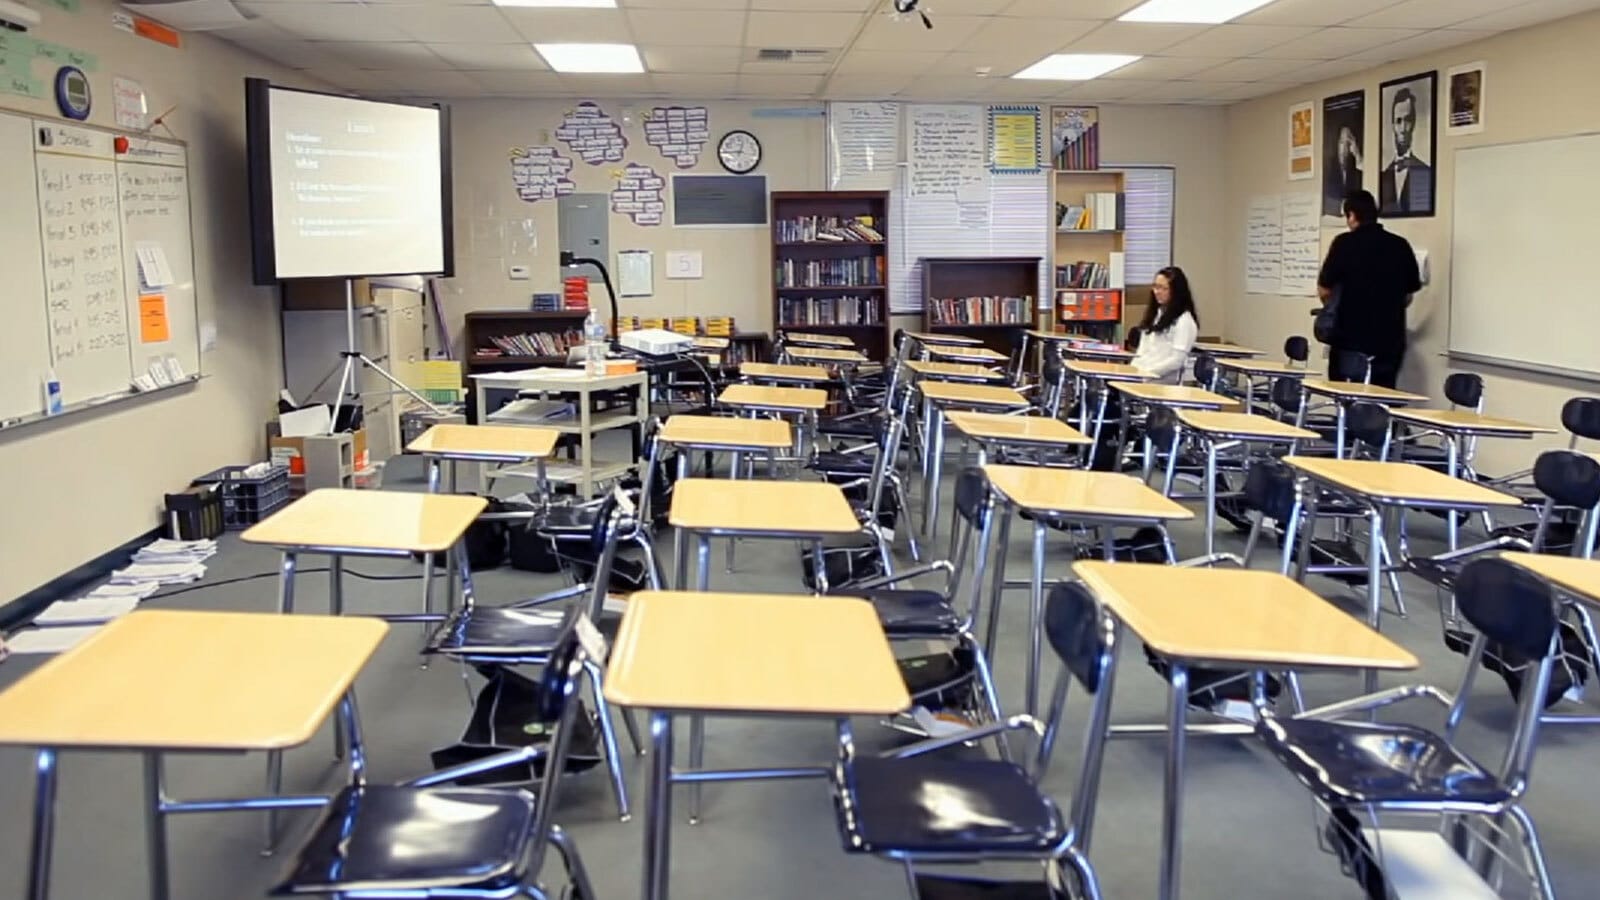 A classroom with five rows of desks, the kind that have black metal seats attached. Two people hang out in the back of the room, next to some bookshelves, posters and a poster of Abe Lincoln.